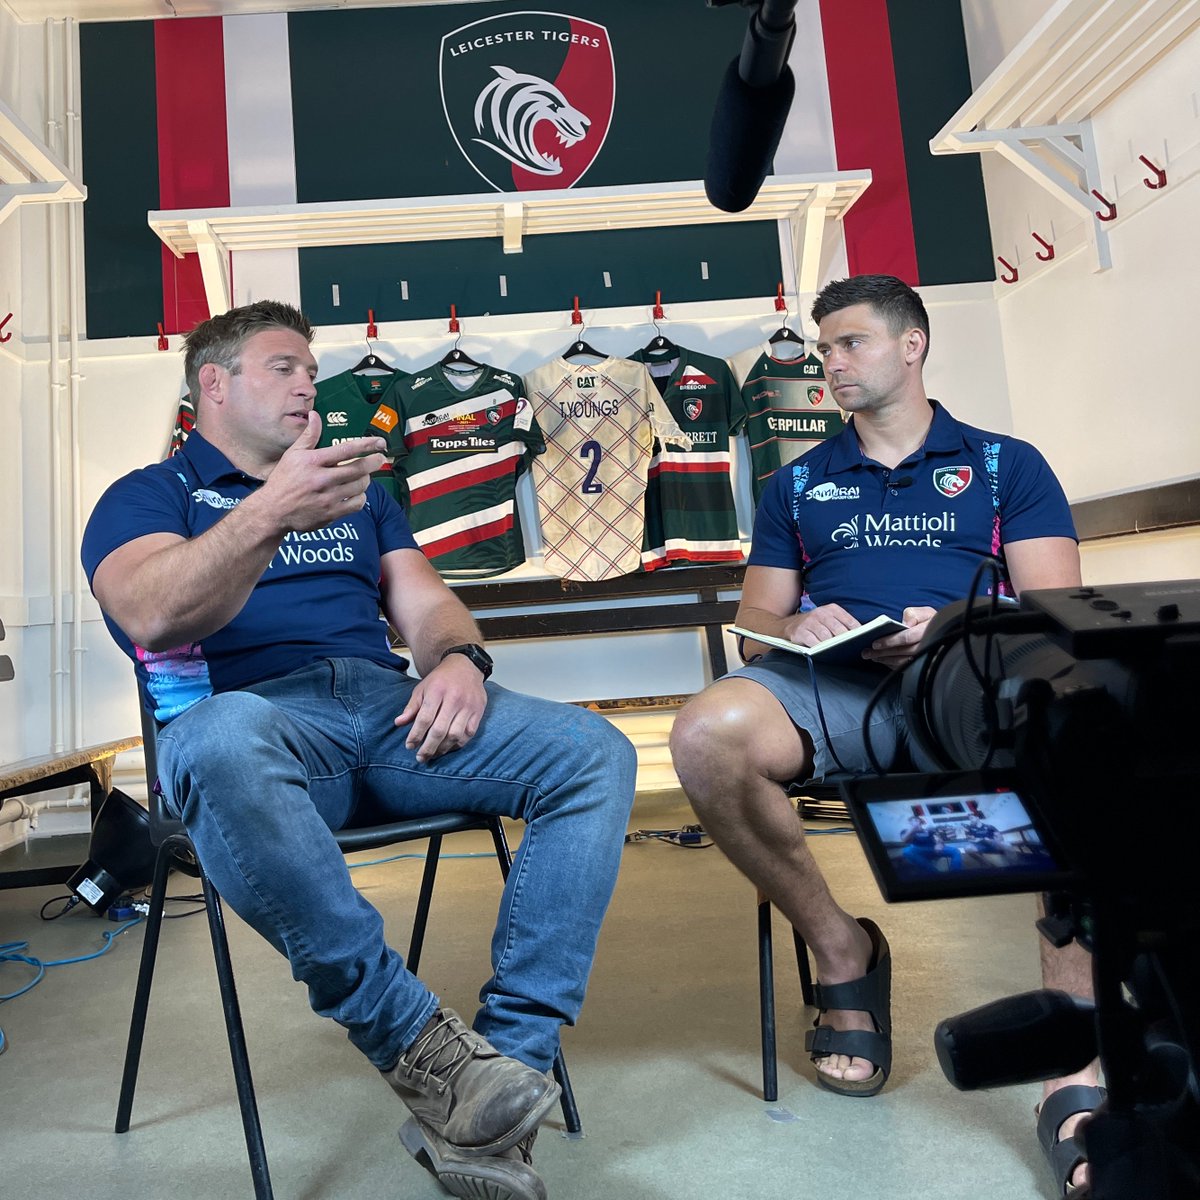 📺 𝗟𝗧𝗧𝗩 𝗦𝗣𝗘𝗖𝗜𝗔𝗟 A must-watch interview for all Leicester Tigers fans, as @TomYoungs87 looks back on his incredible career with brother (and team-mate) @benyoungs09. #TigersFamily 🐯 See it here ➡️ LeicesterTigers.com/news/lttv-tom-…